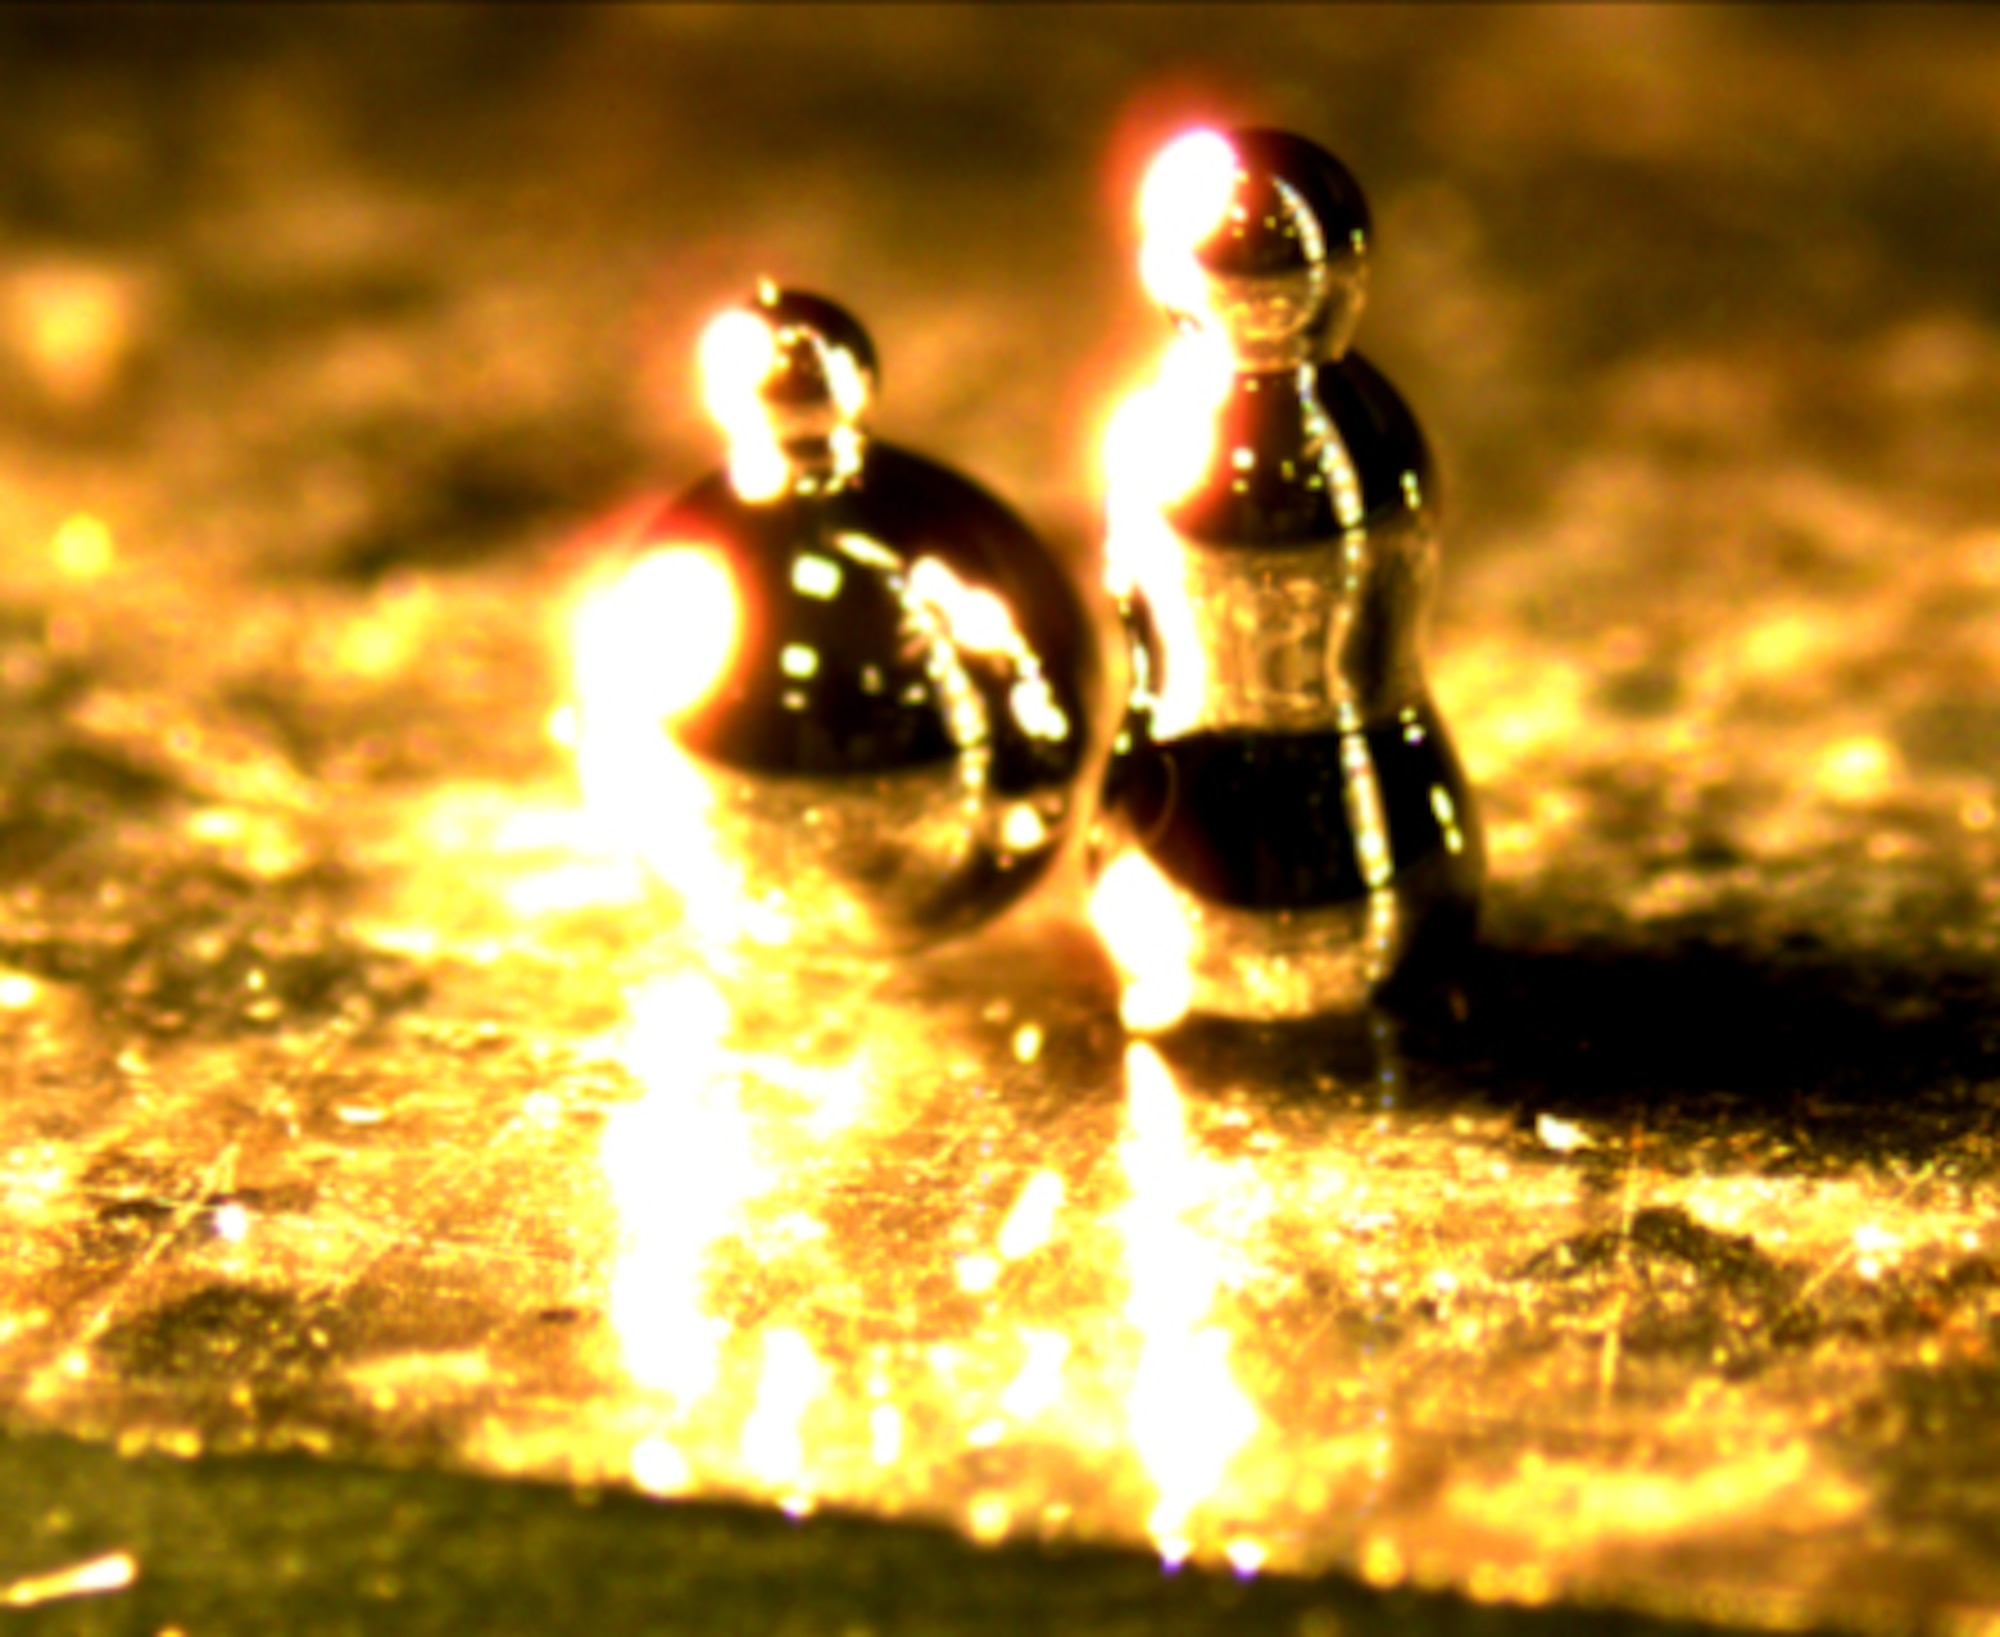 The enabling attributes of Gallium Liquid Metal Alloys (GaLMAs) make them ideal for 3D freestanding liquid metal structures, as demonstrated by these GaLMA “snowmen.” These structures can lead to the development of three-dimensional circuitry. (U.S. Air Force photo)